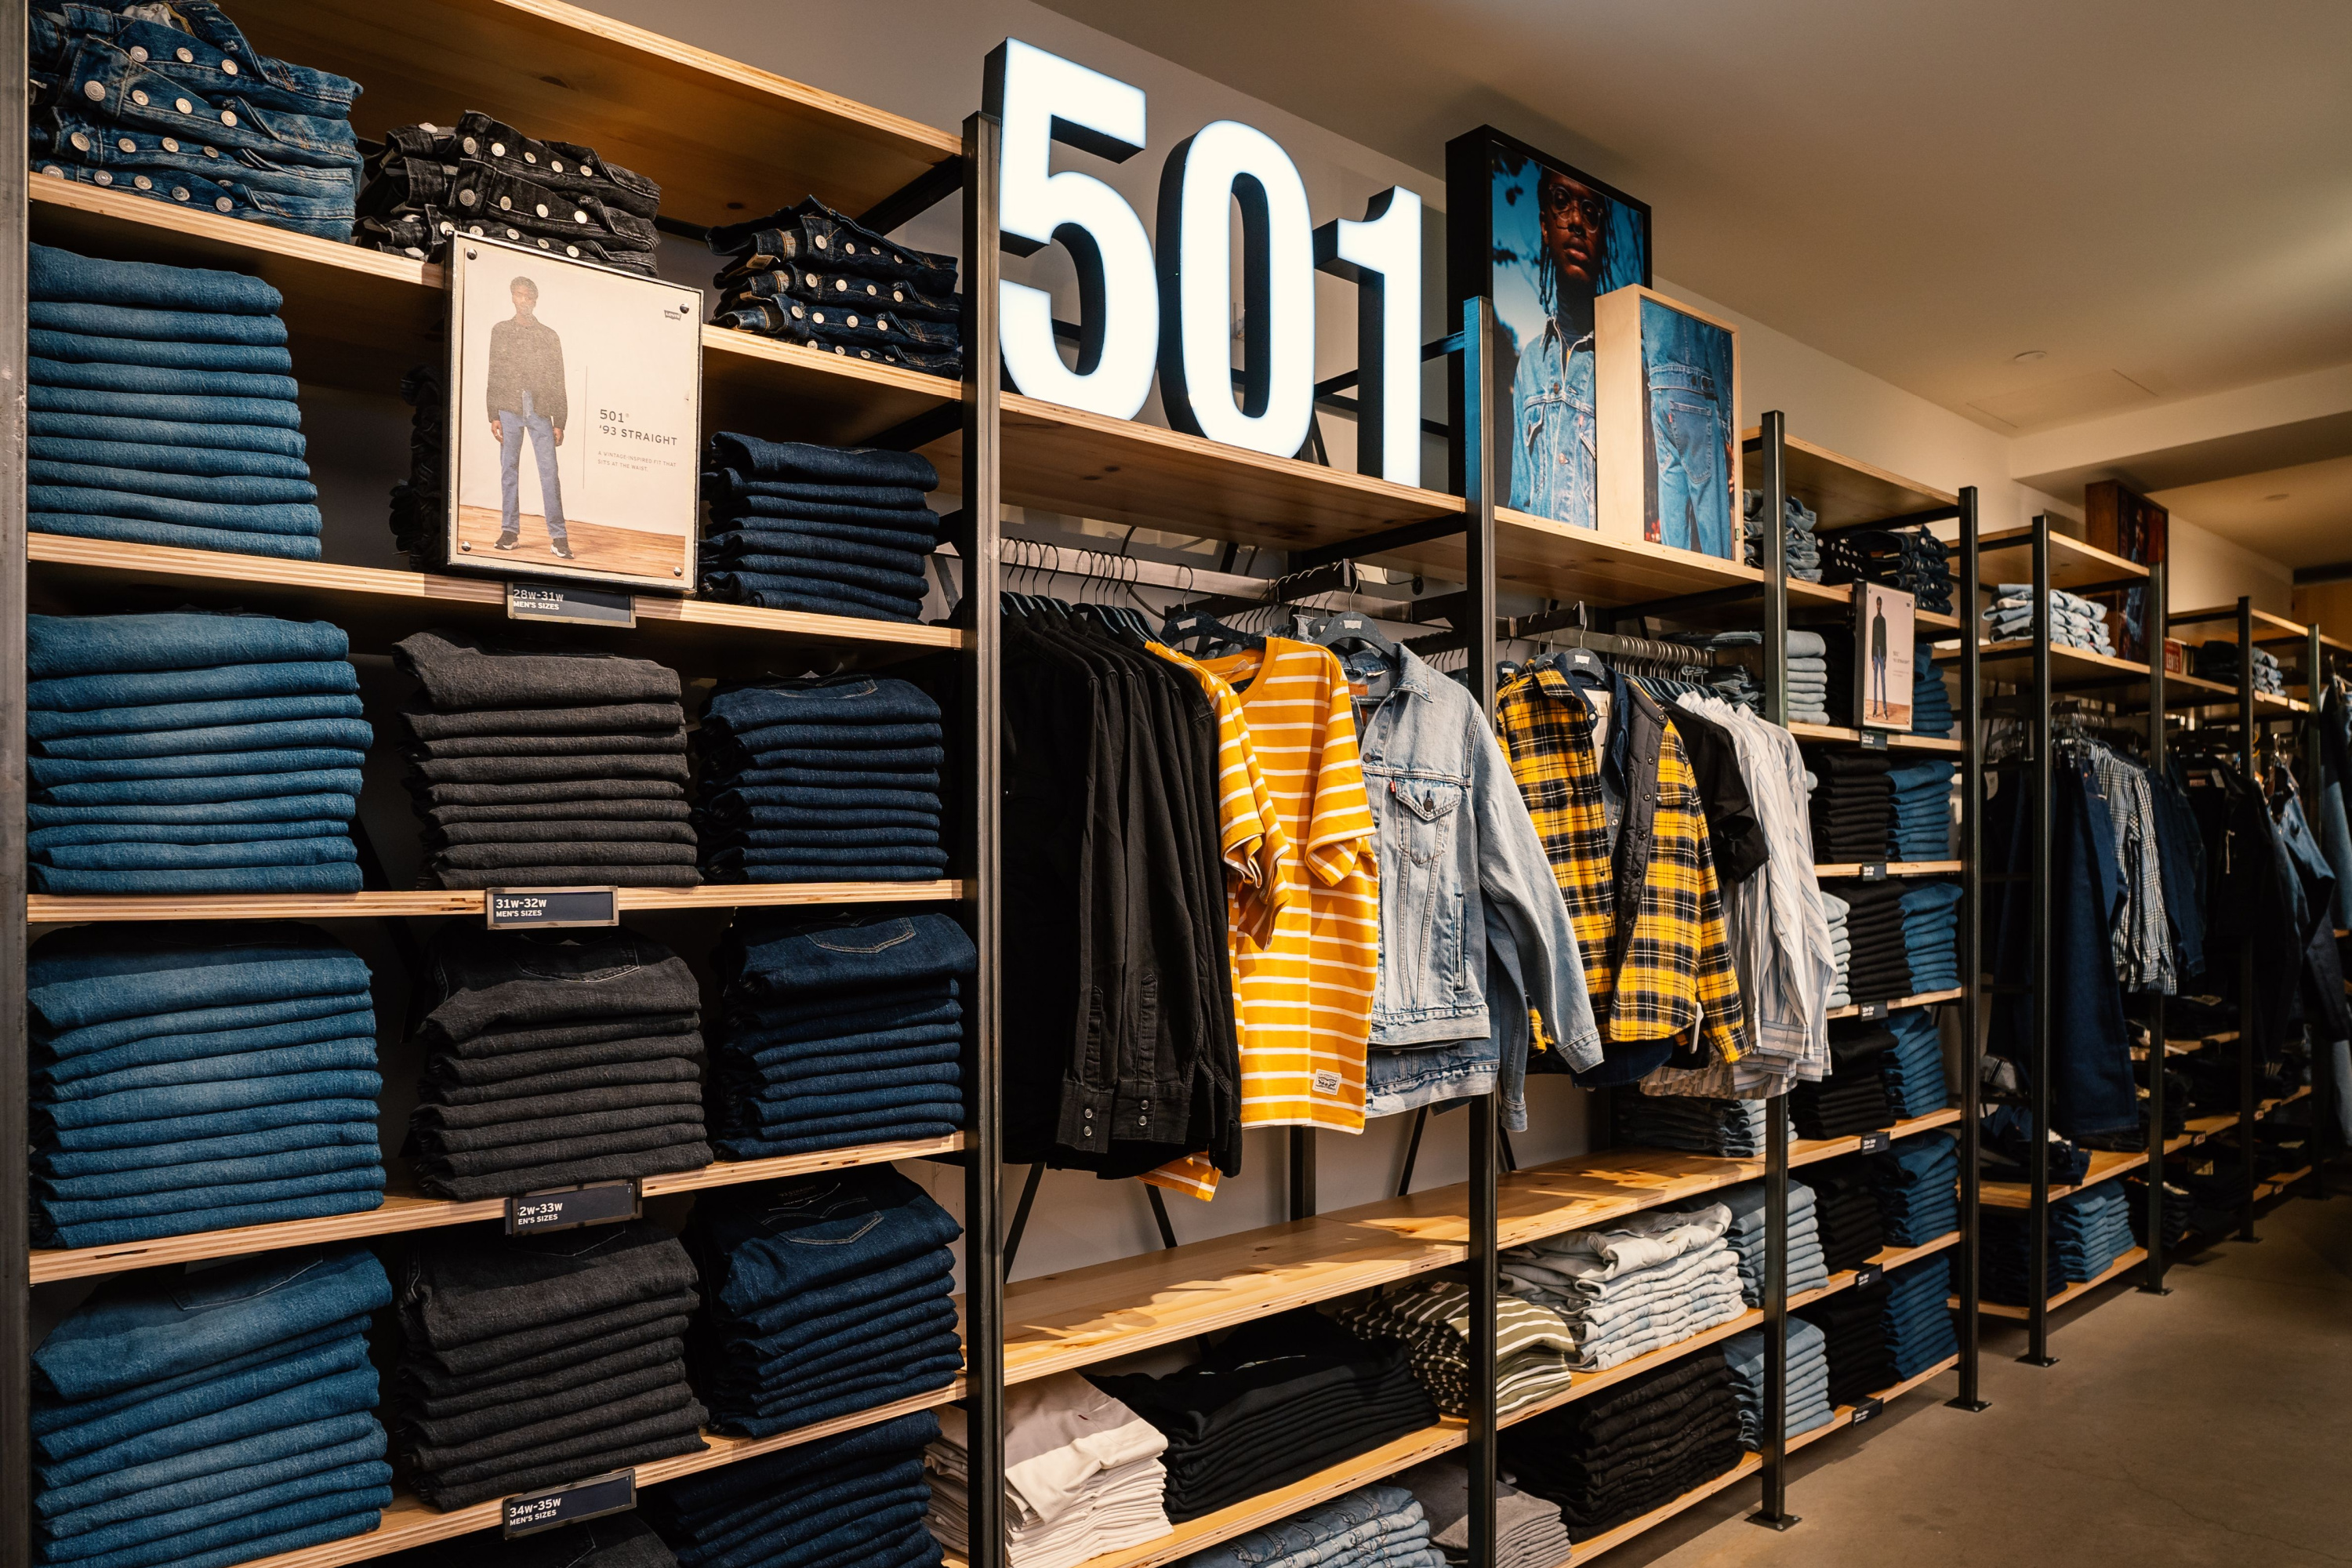 Levi's launches sustainable plant-based 501 jeans